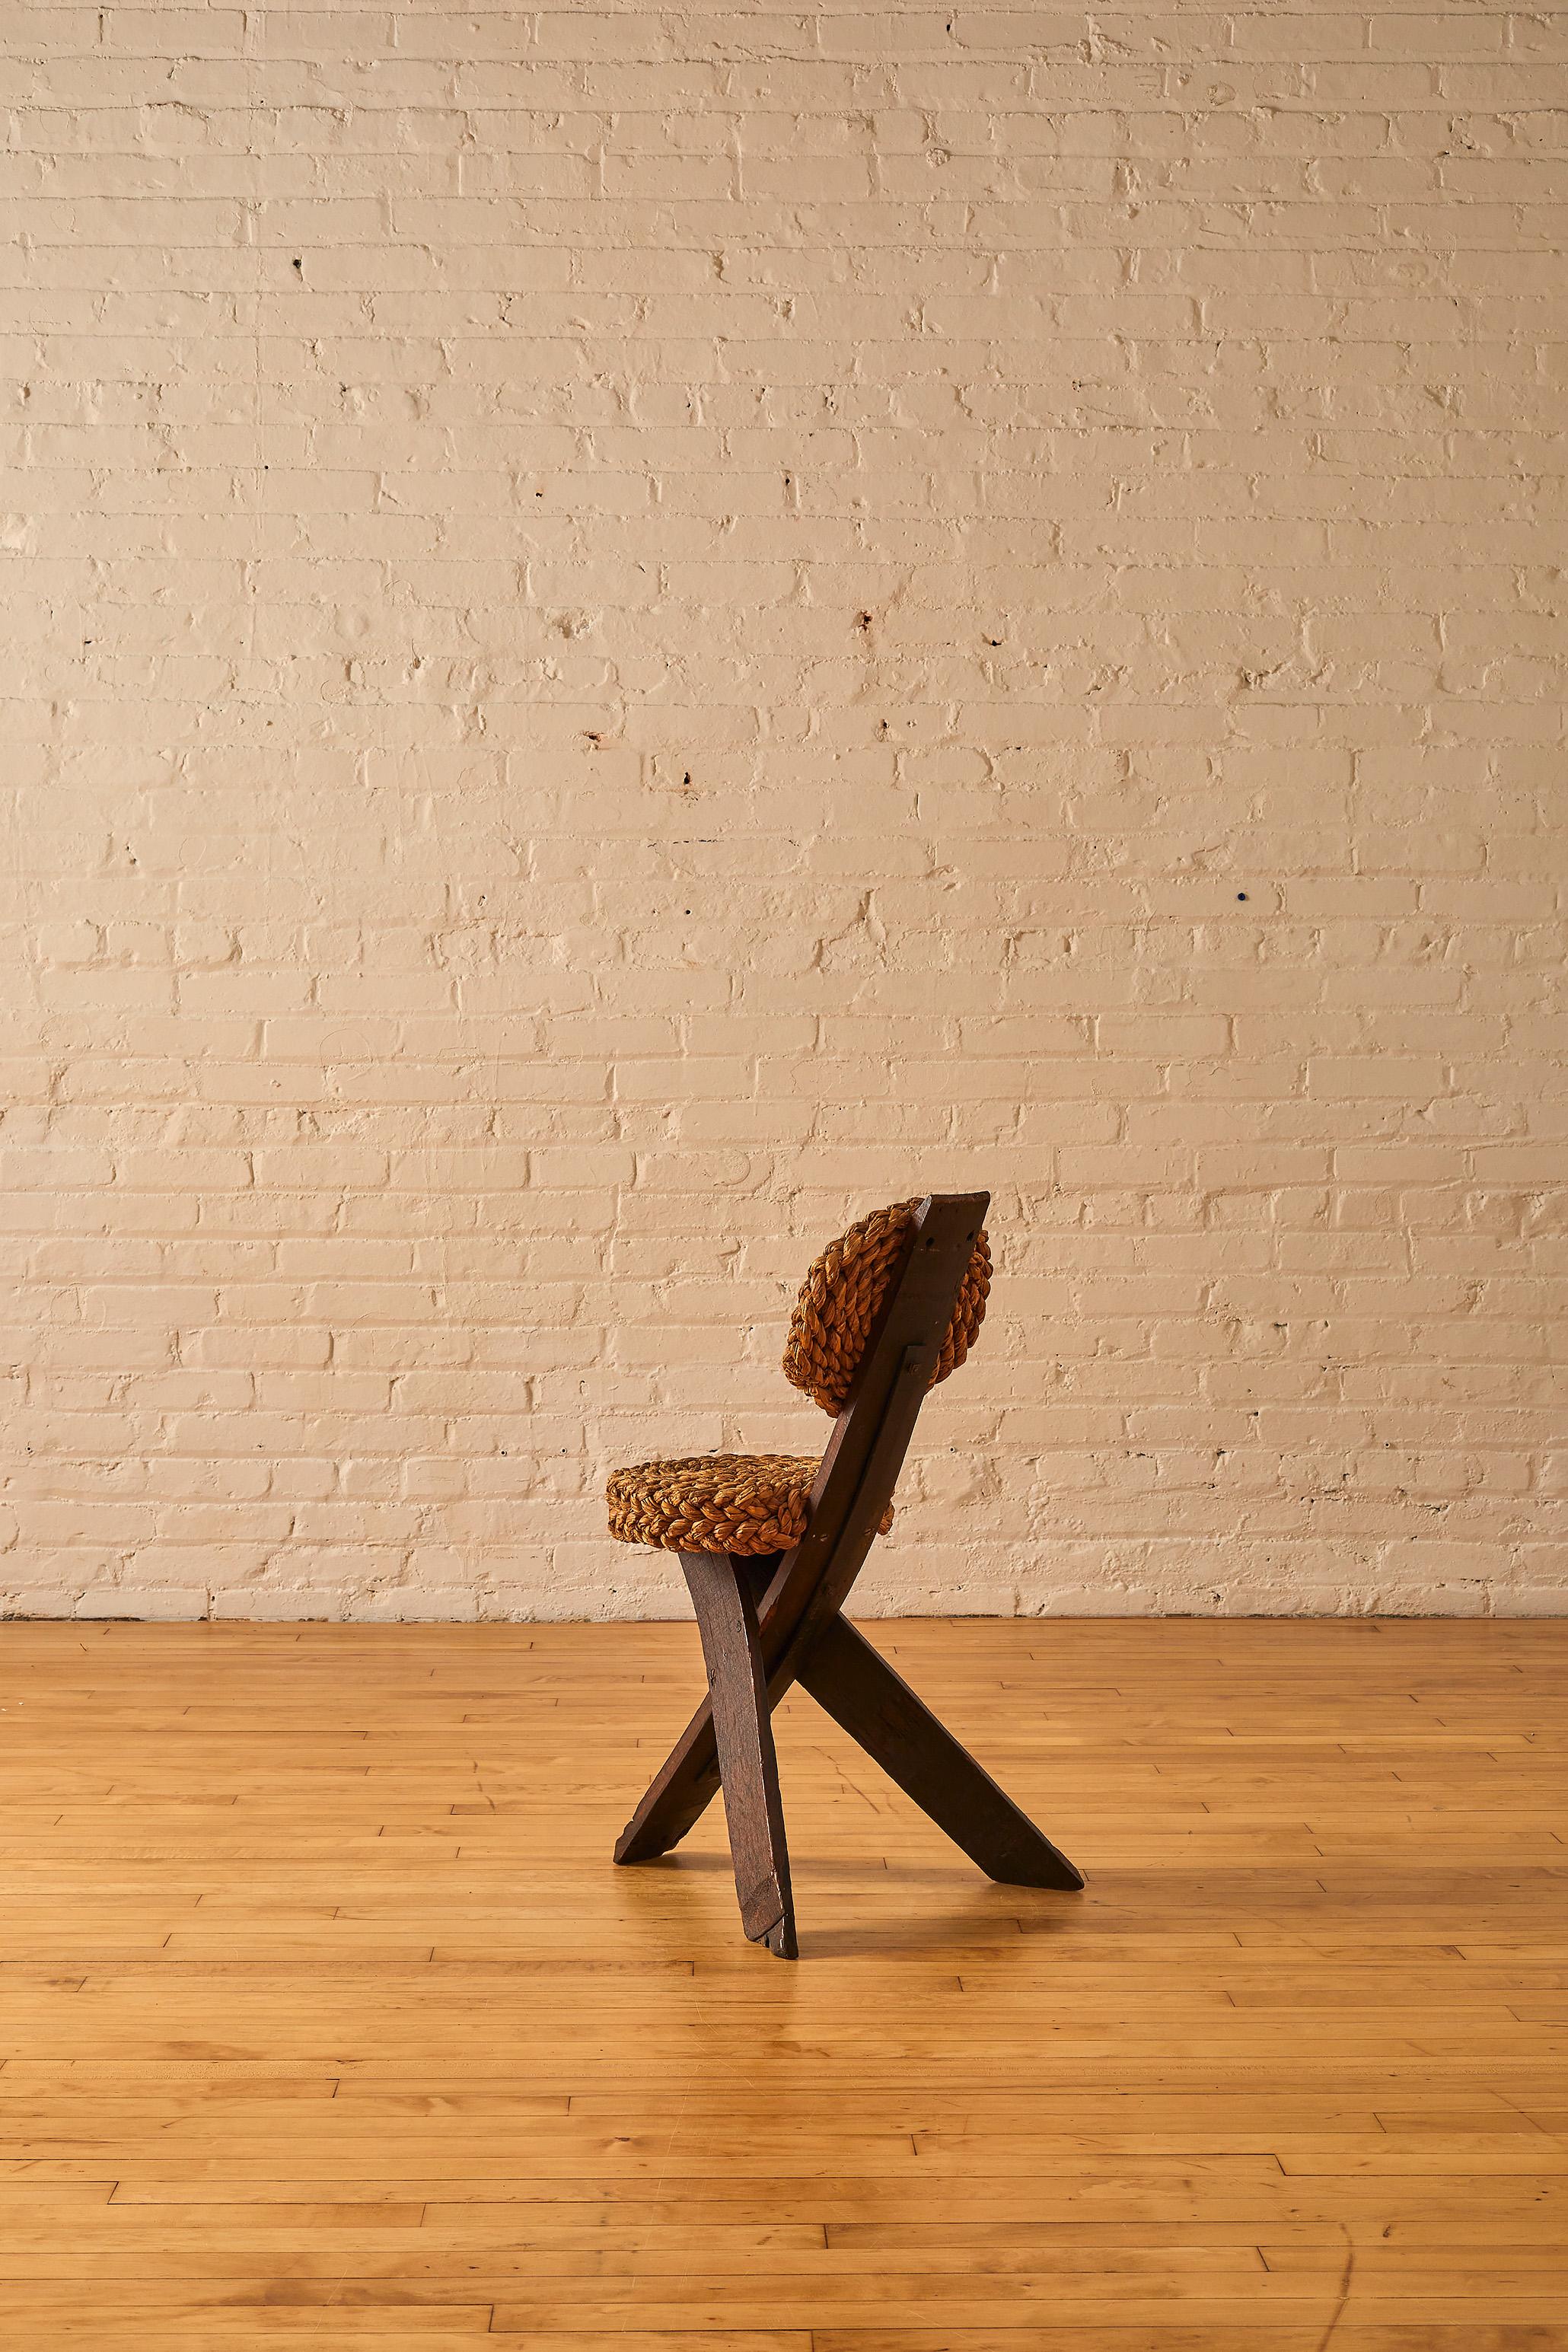 20th Century Tripod Rope Chair by Adrien Audoux & Frida Minet